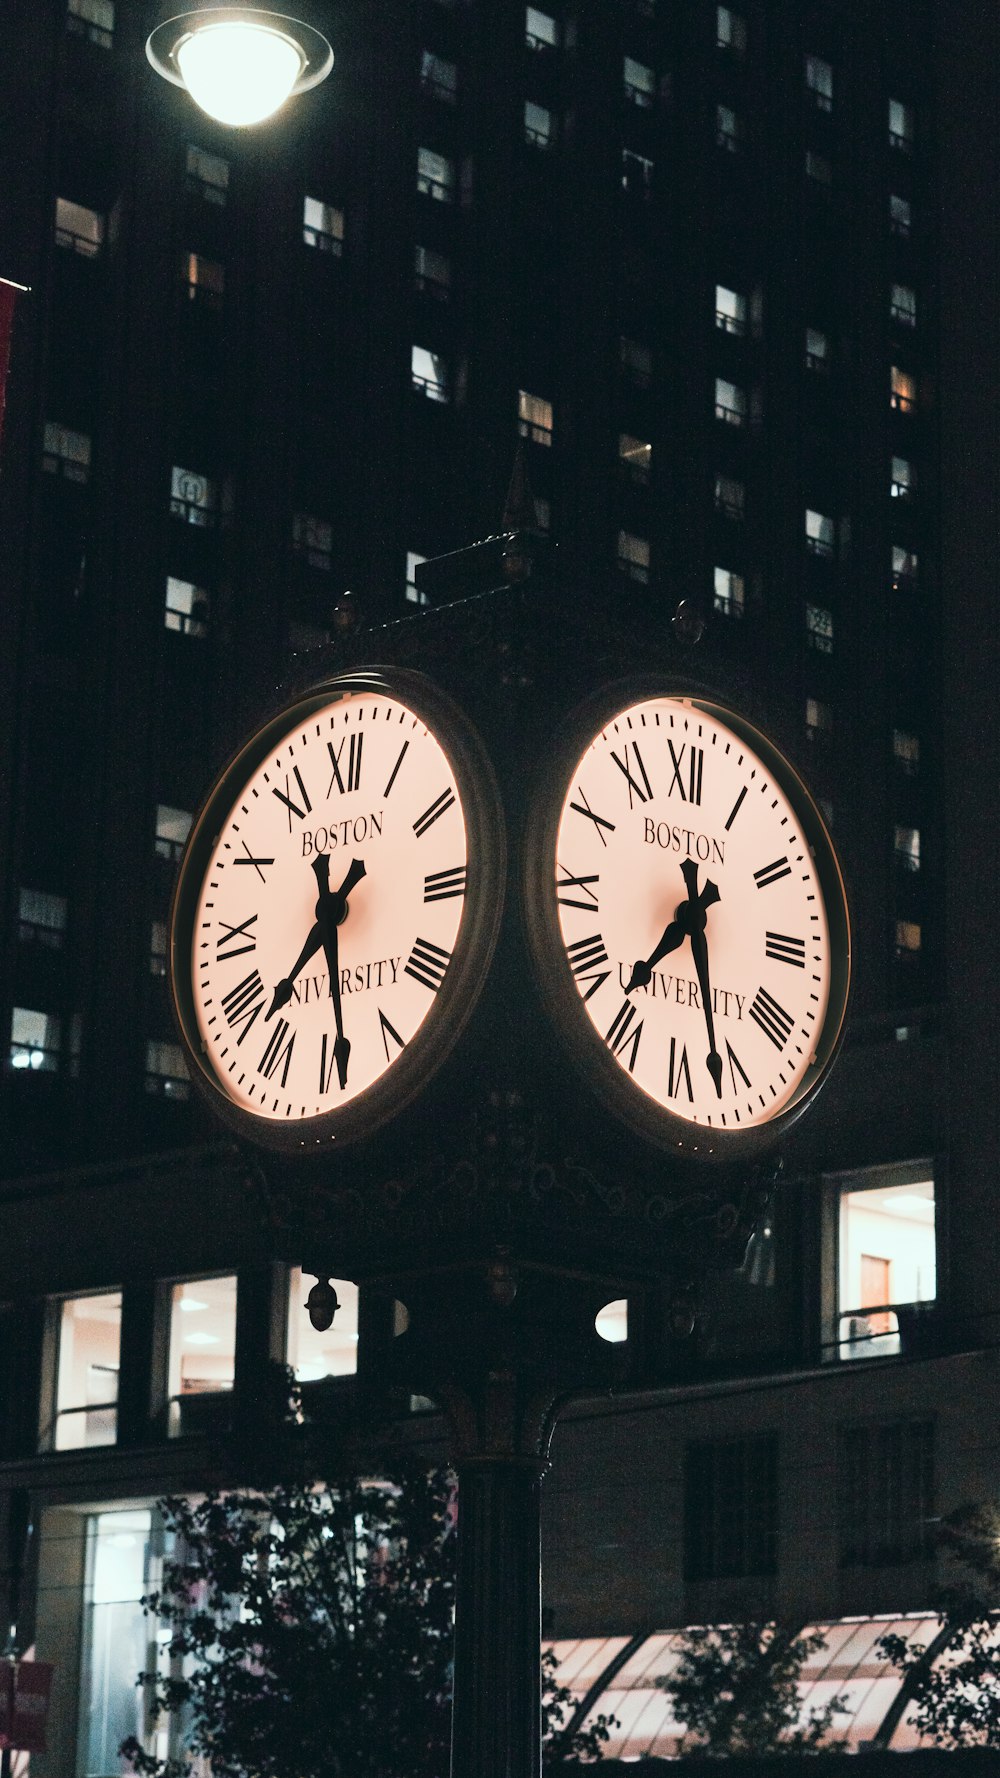 a large clock on a pole in front of a building